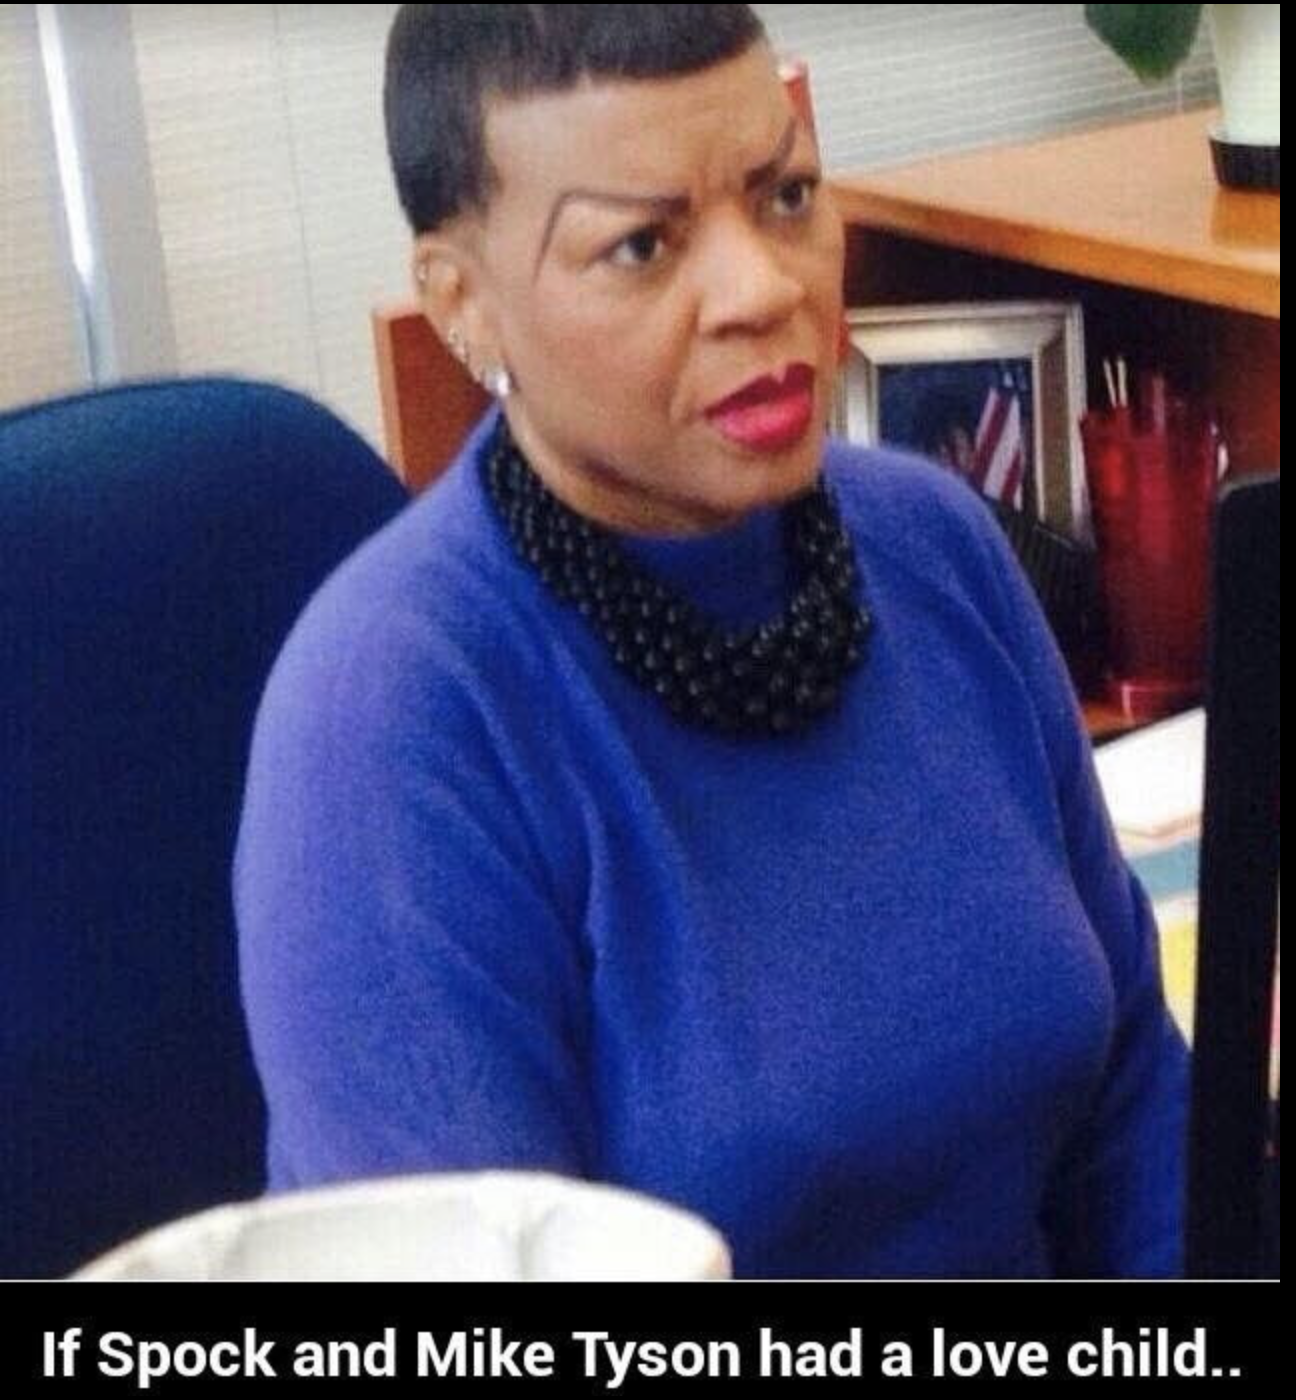 star trek eyebrows - If Spock and Mike Tyson had a love child..